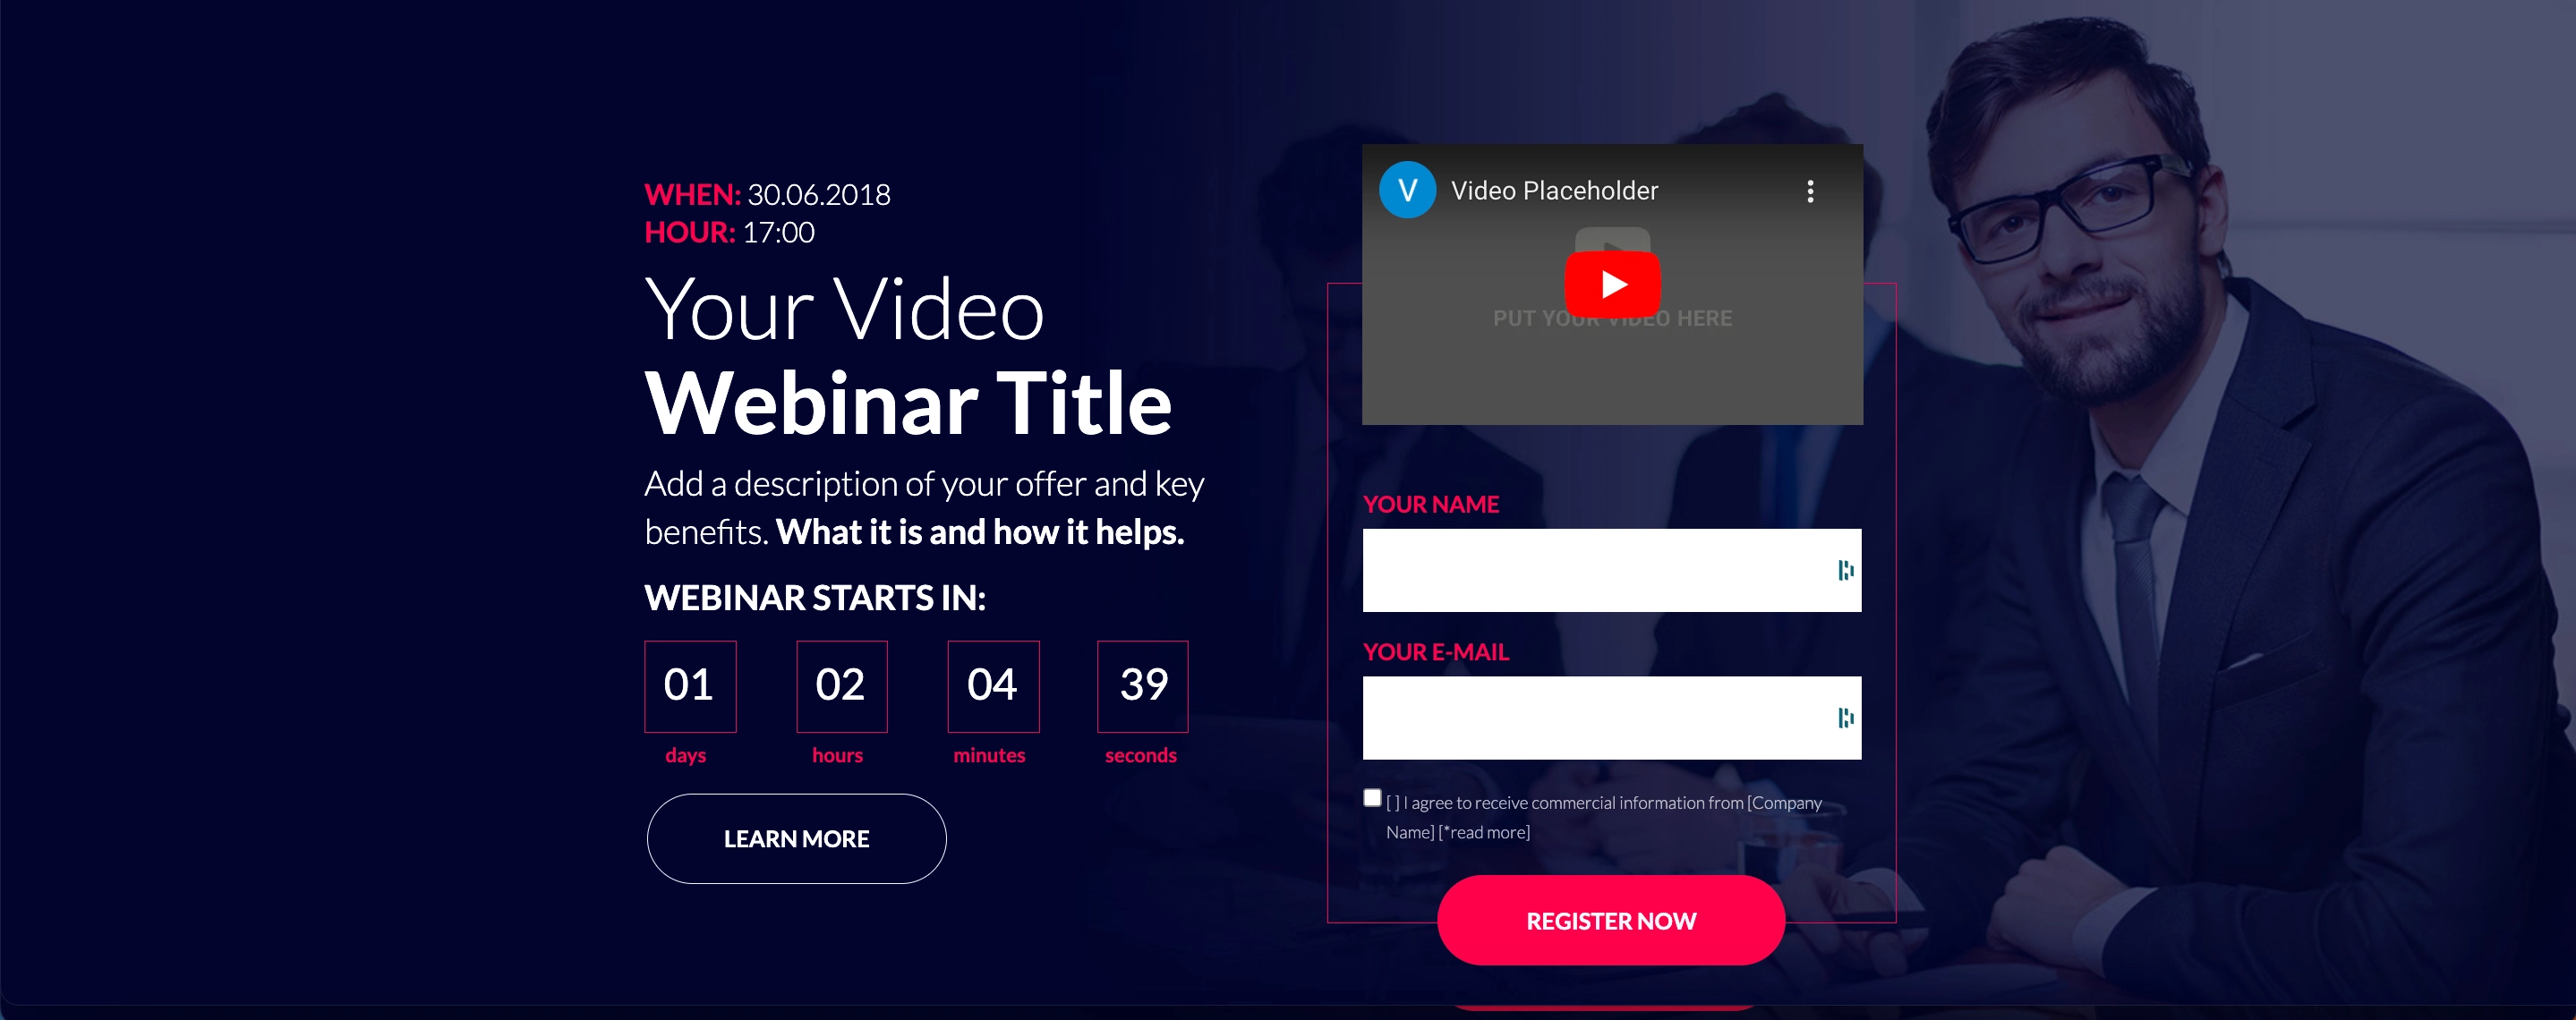 Landing page for webinars and educational videos